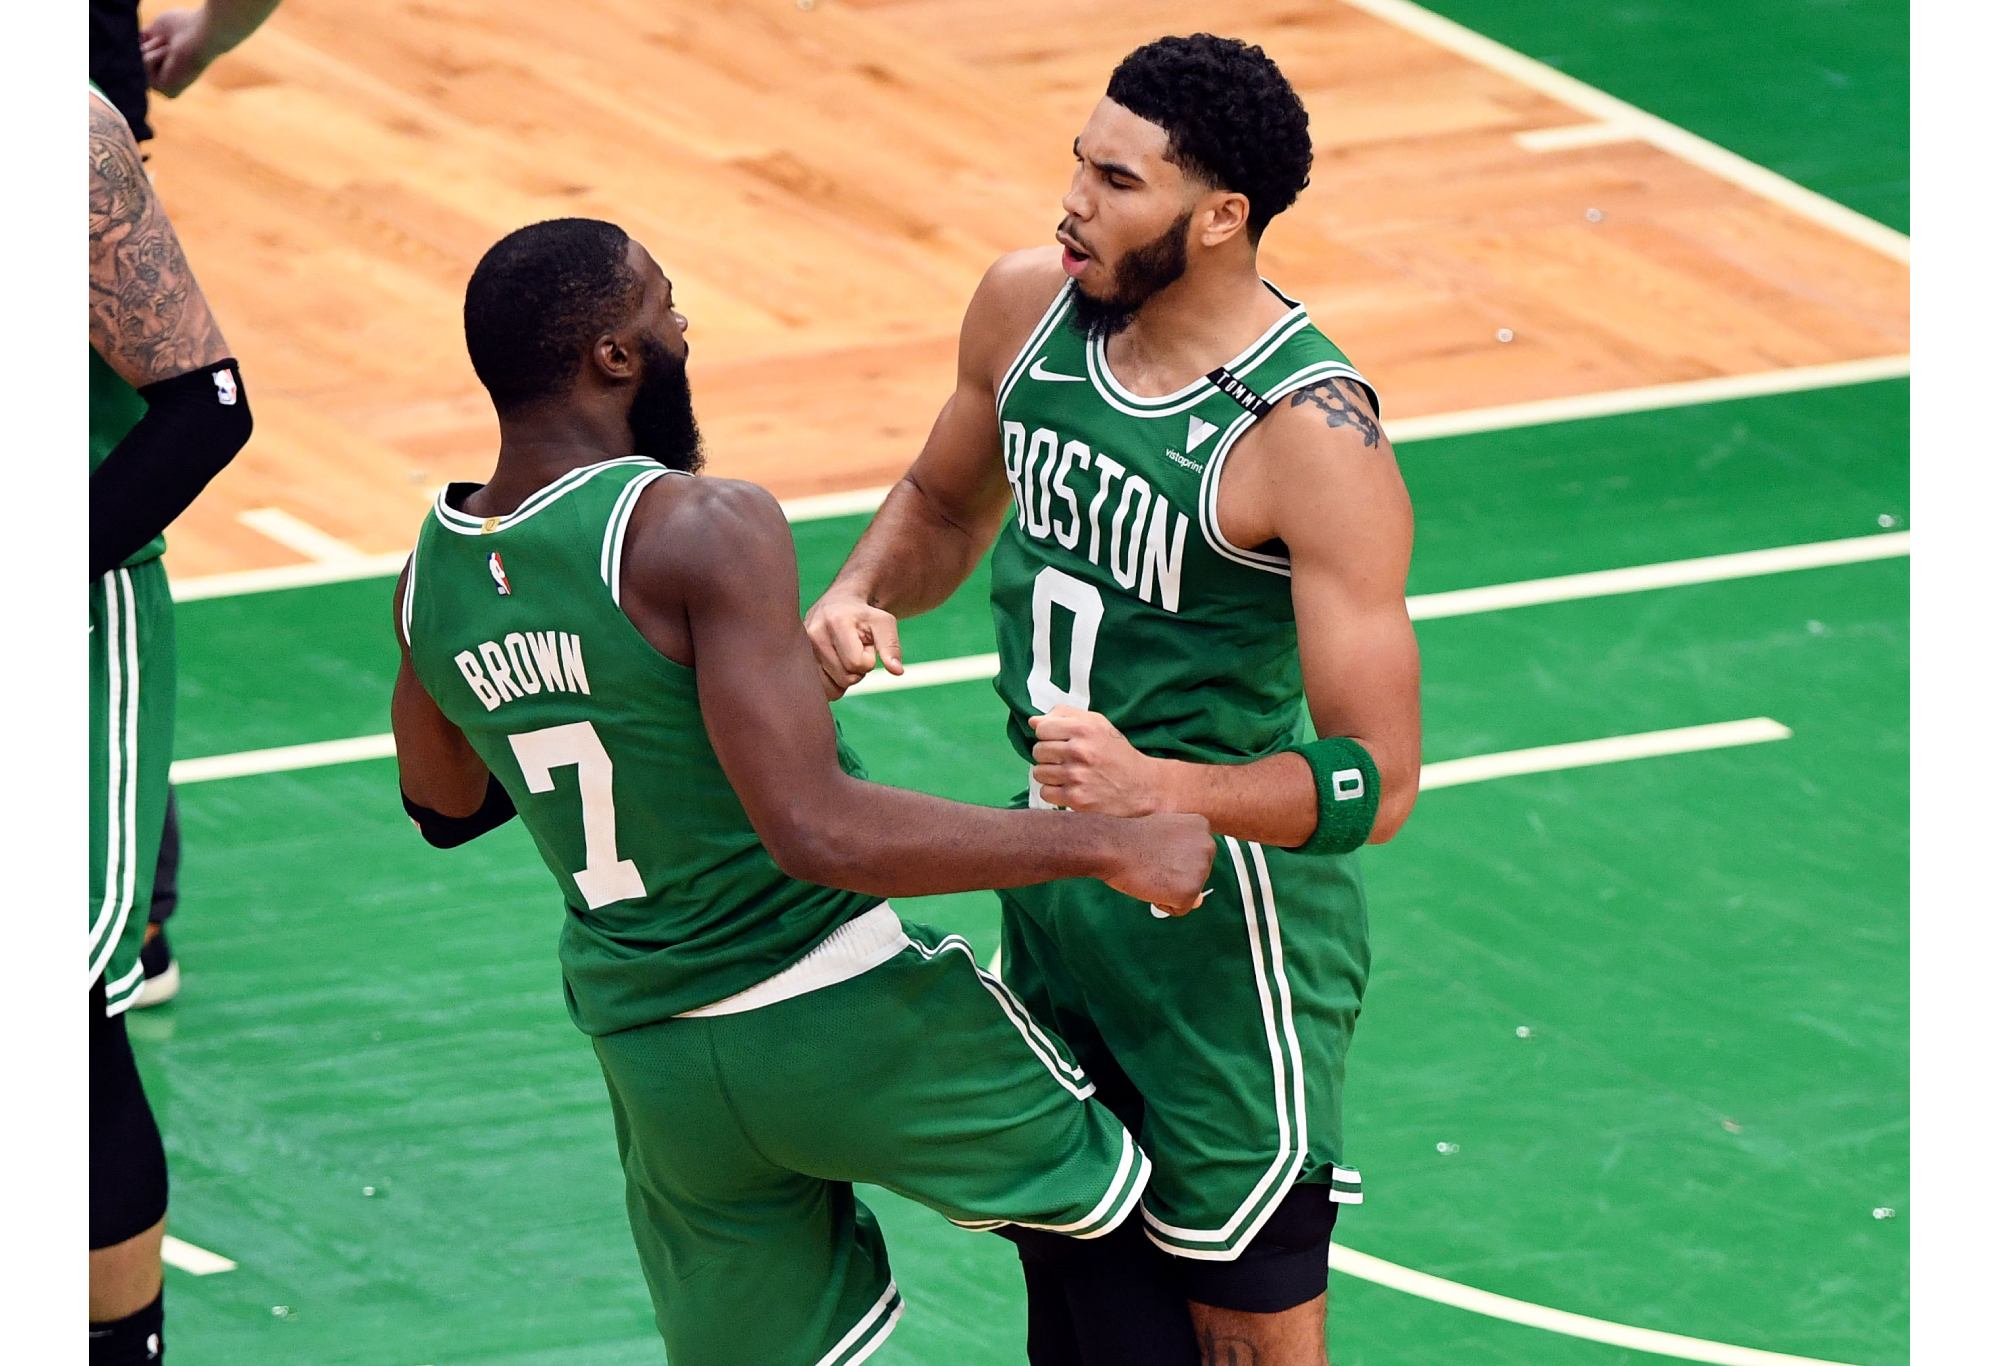 BOSTON, MASSACHUSETTS - DECEMBER 23: Jayson Tatum #0 and Jaylen Brown #7 of the Boston Celtics celebrate after scoring against the Milwaukee Bucks during the second half at TD Garden on December 23, 2020 in Boston, Massachusetts. NOTE TO USER: User expressly acknowledges and agrees that, by downloading and/or using this photograph, user is consenting to the terms and conditions of the Getty Images License Agreement. (Photo by Brian Fluharty-Pool/Getty Images)